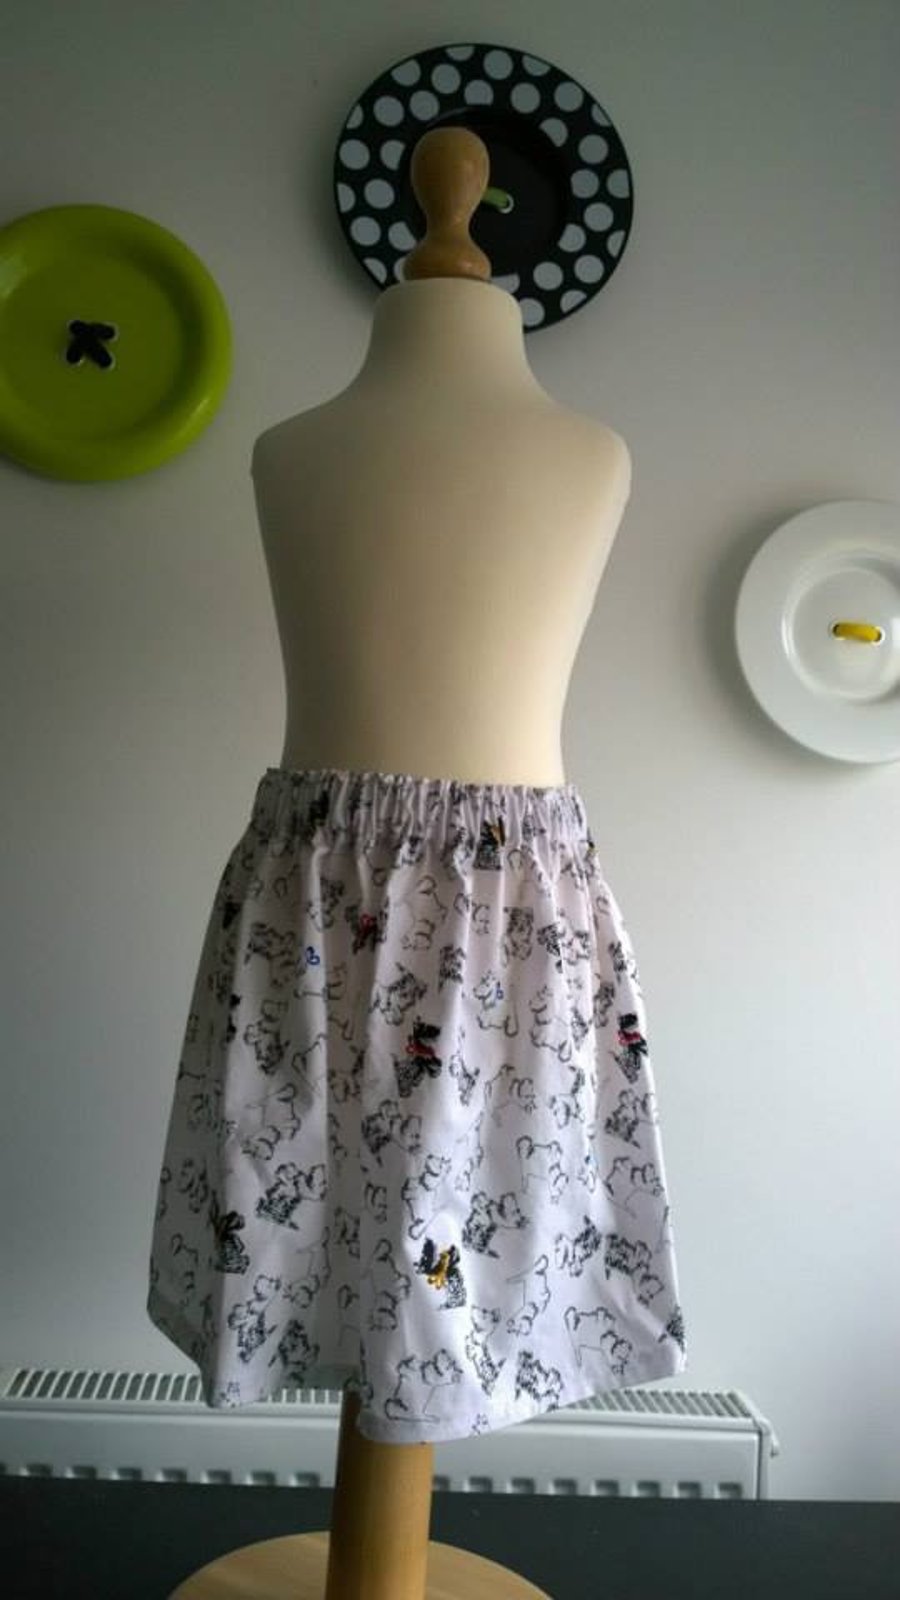 Black and White Doggy skirt age 4 SALE